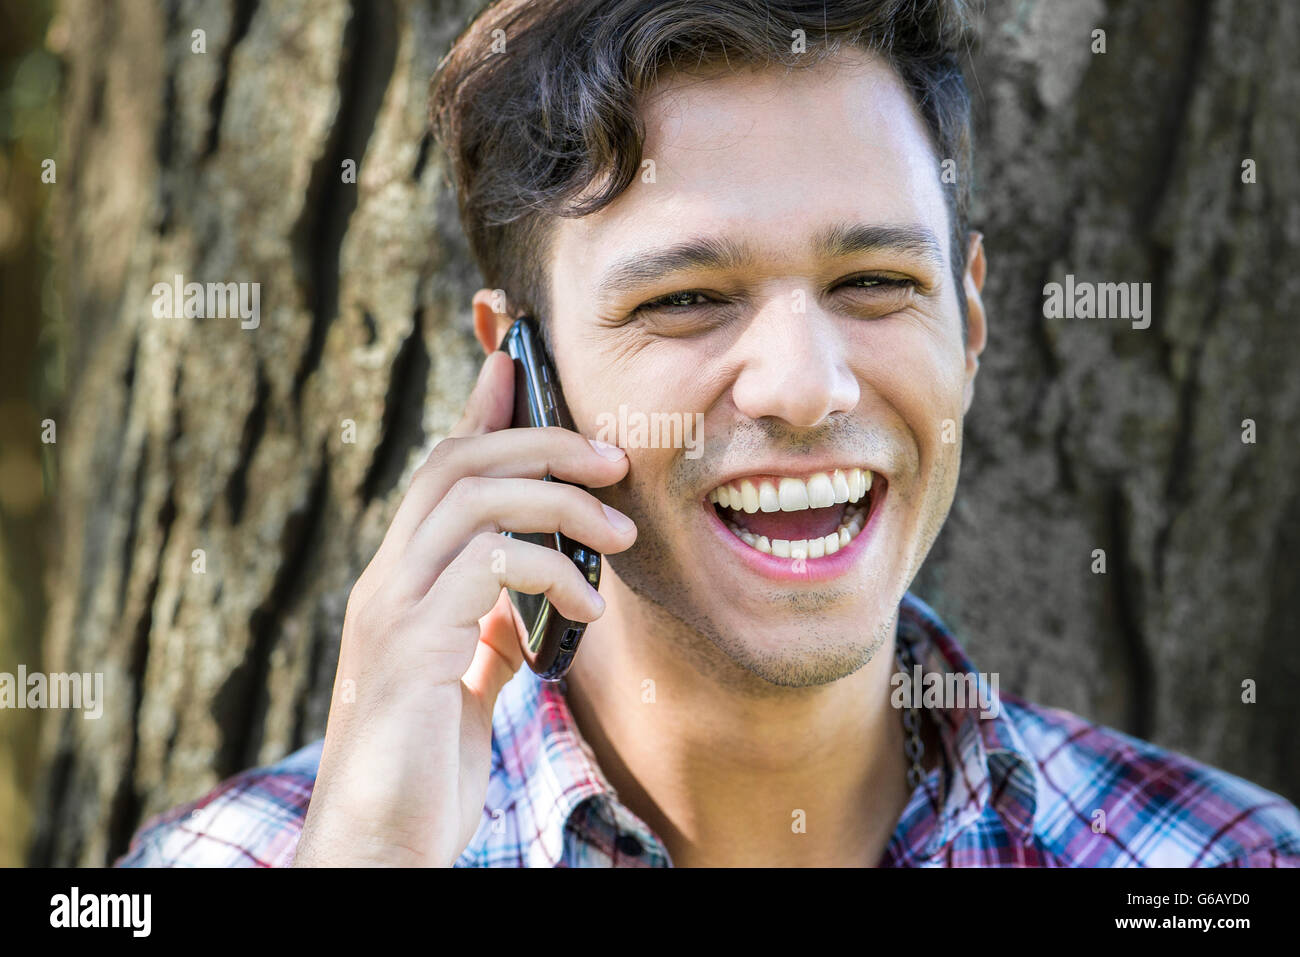 Man having lighthearted conversation on cell phone Stock Photo